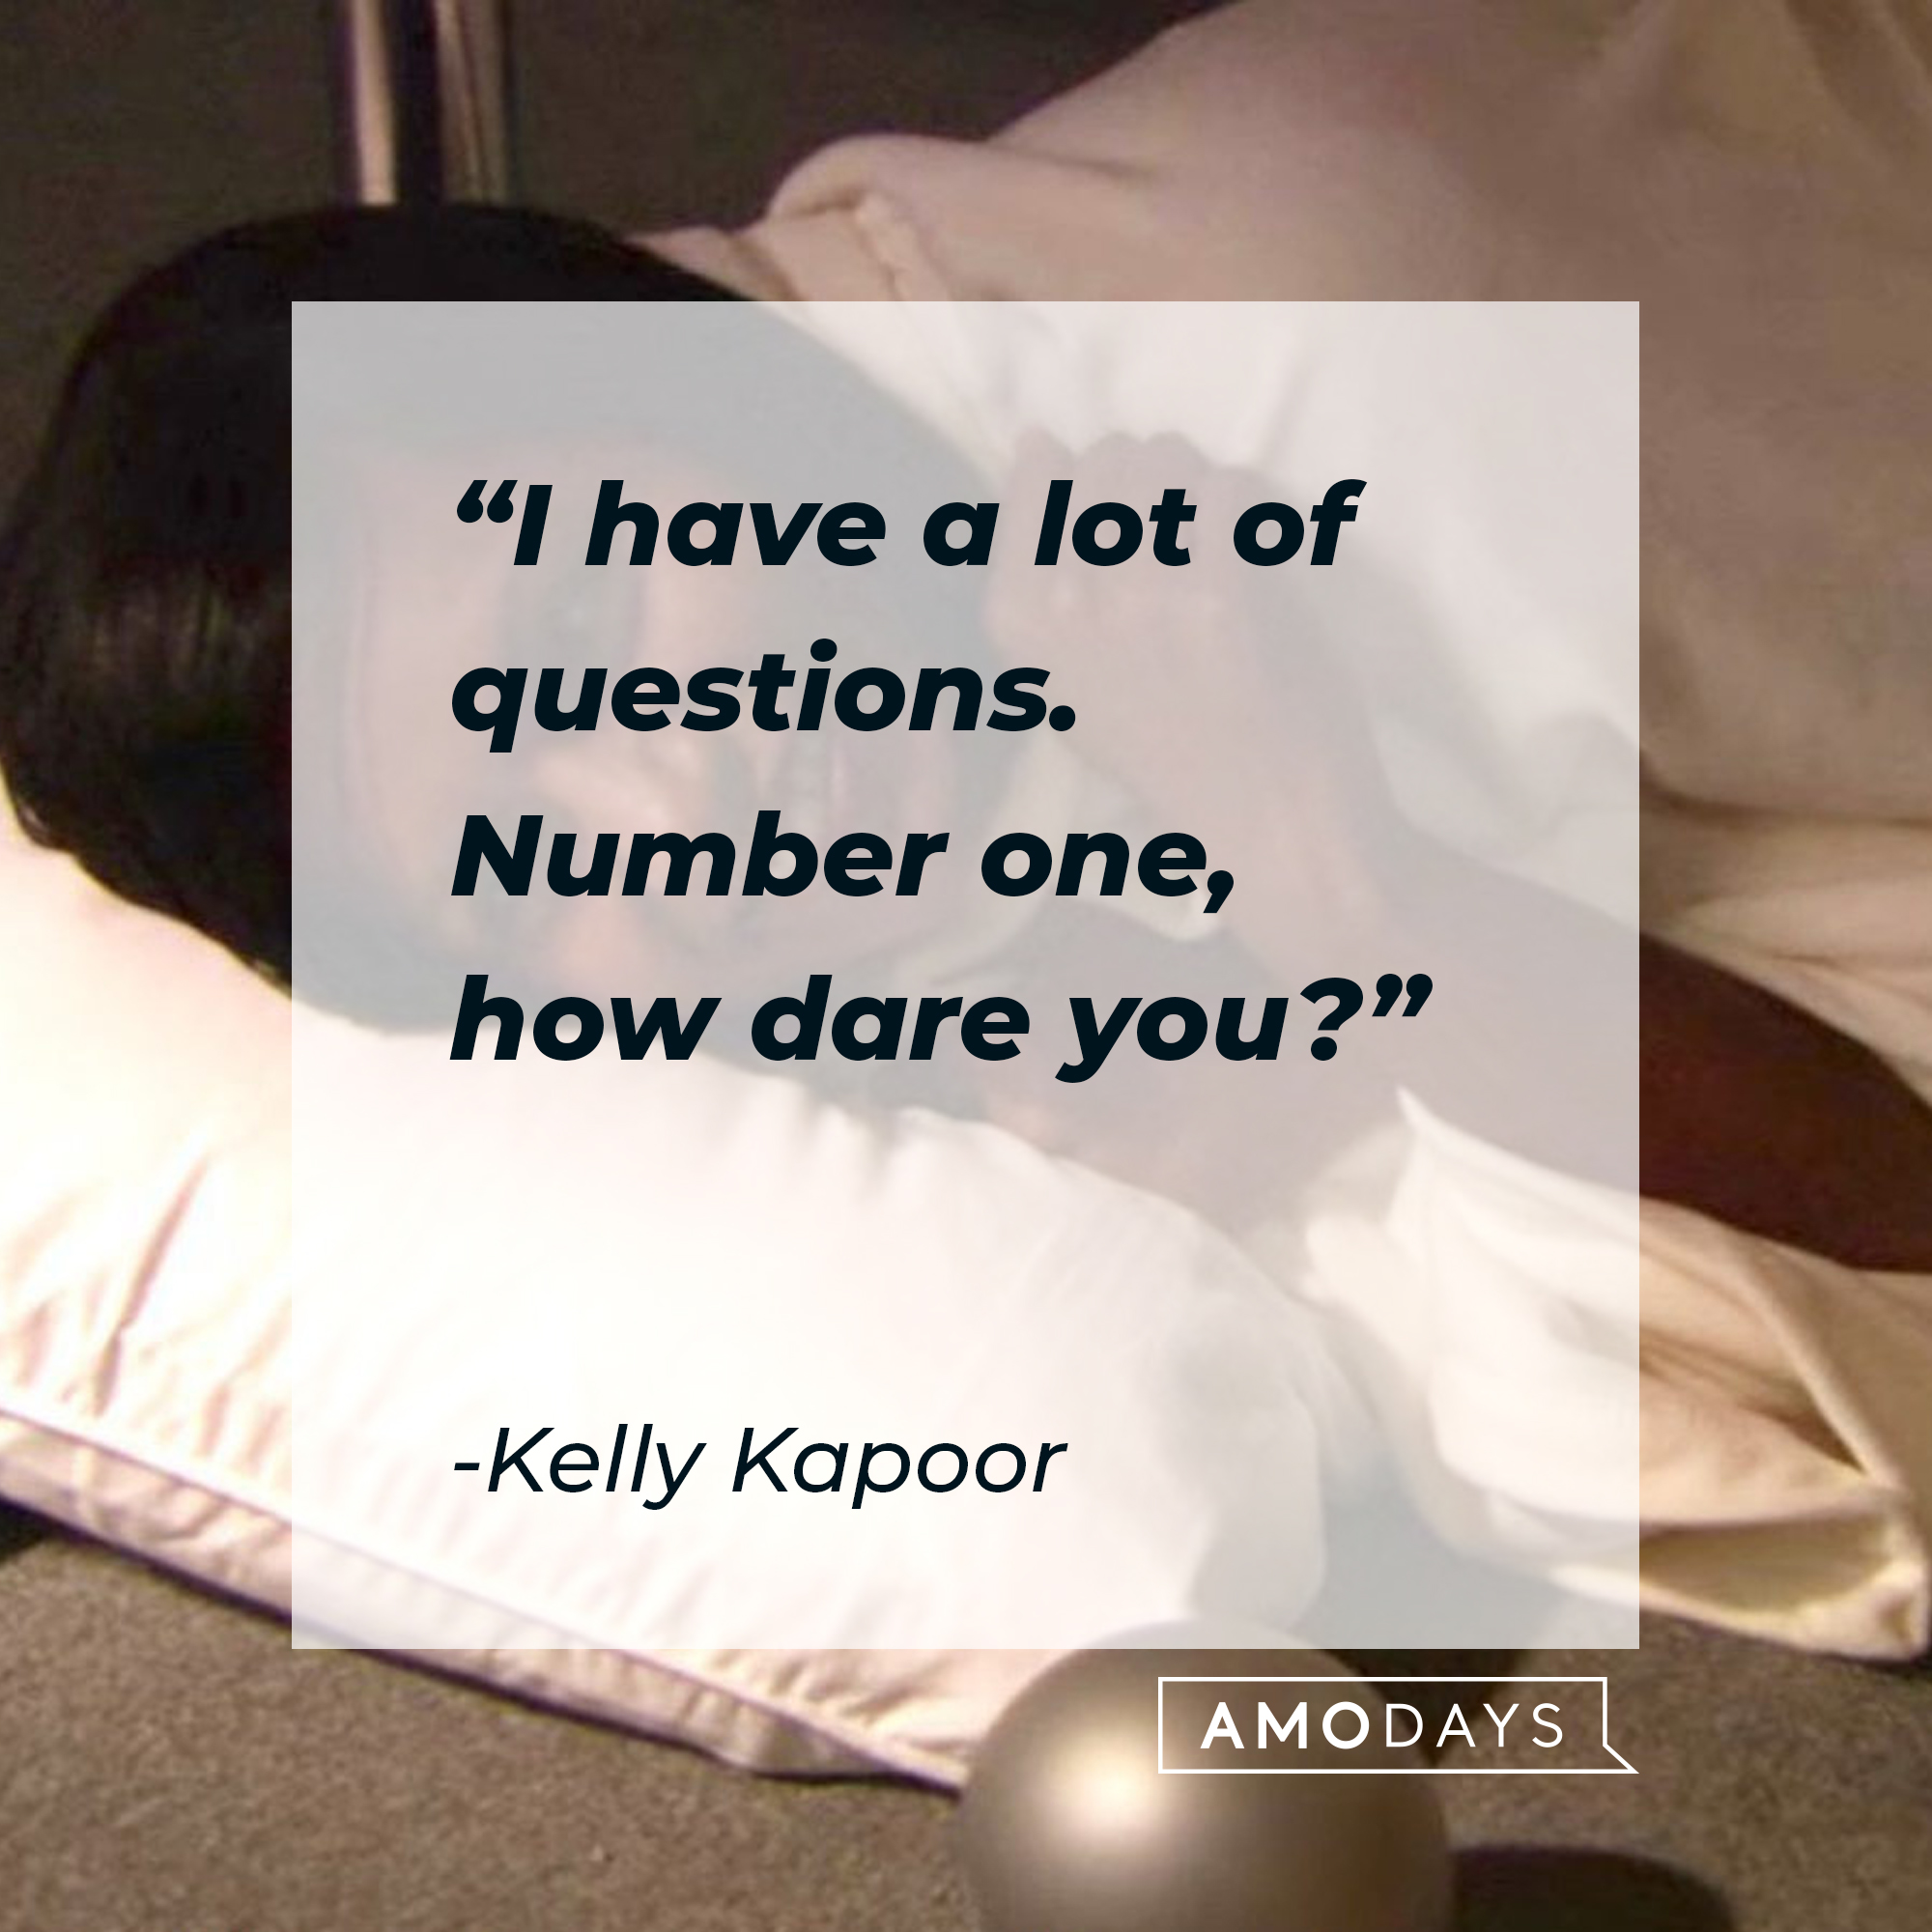 Kelly Kapoor's quote: "I have a lot of questions. Number one, how dare you?" | Source: facebook.com/TheOfficeTV